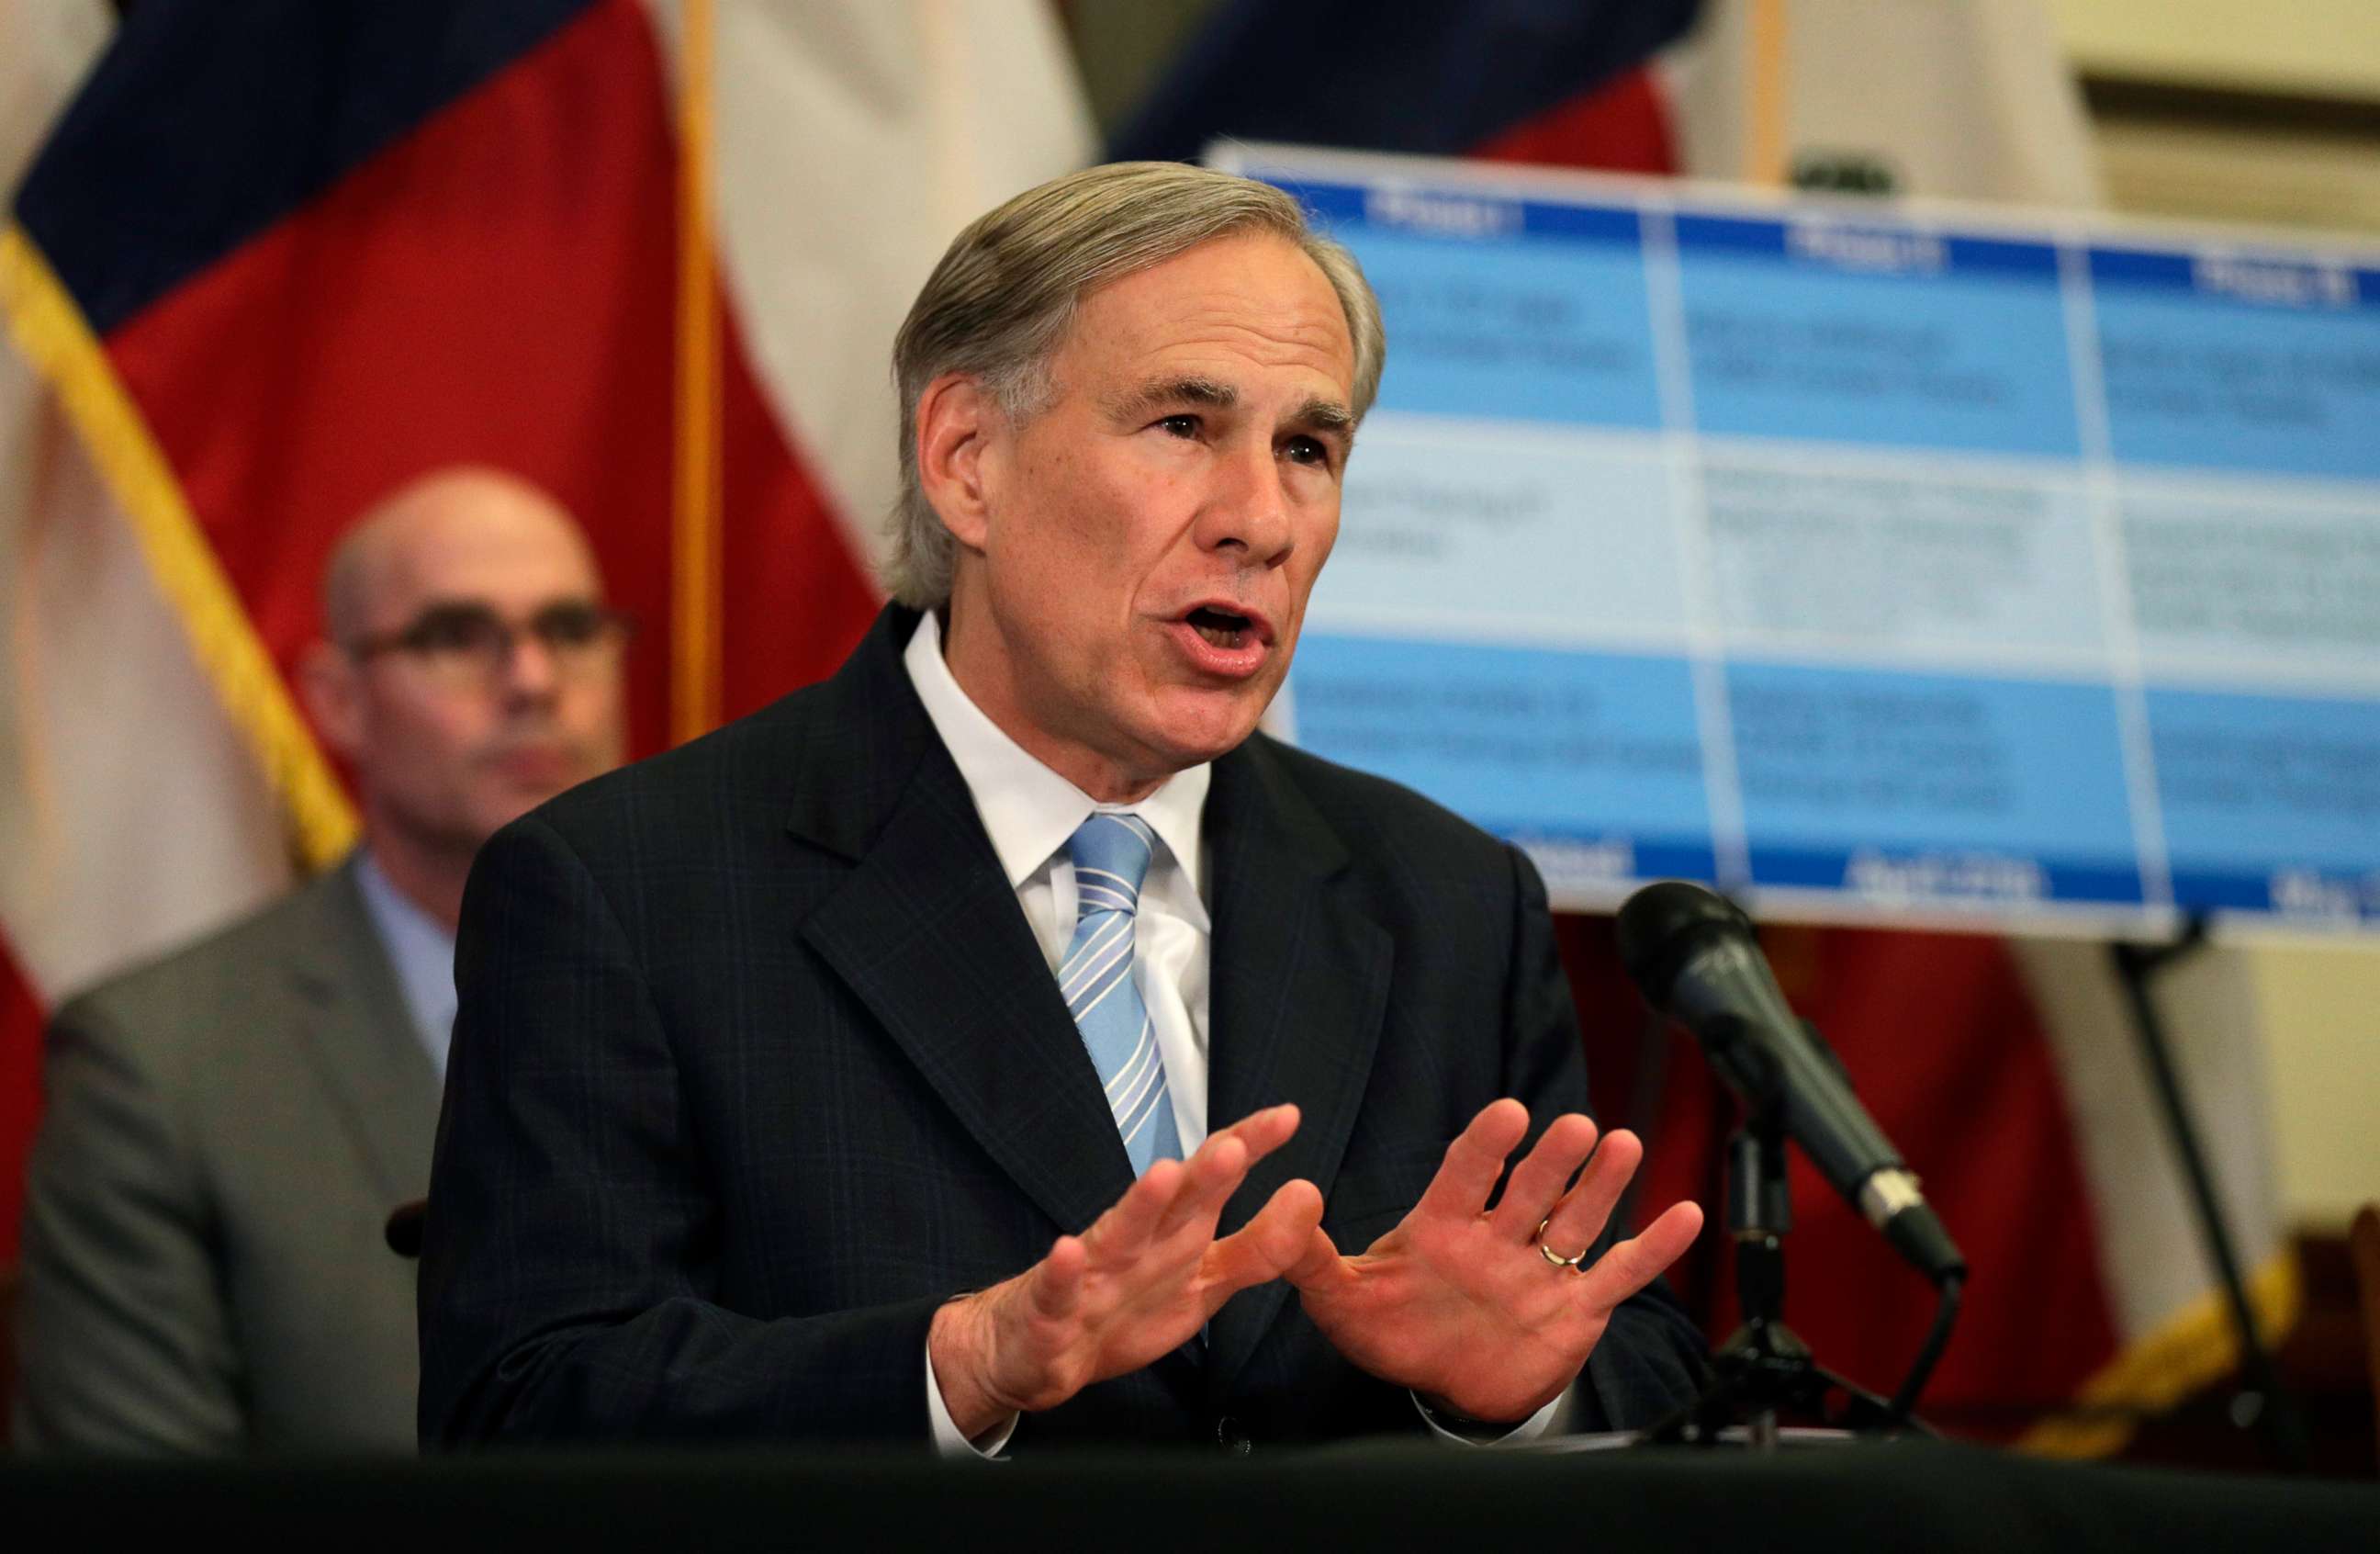 PHOTO: Texas Gov. Greg Abbott speaks during a news conference where he announced he would relax some restrictions imposed on some businesses due to the COVID-19 pandemic, April 27, 2020, in Austin, Texas.